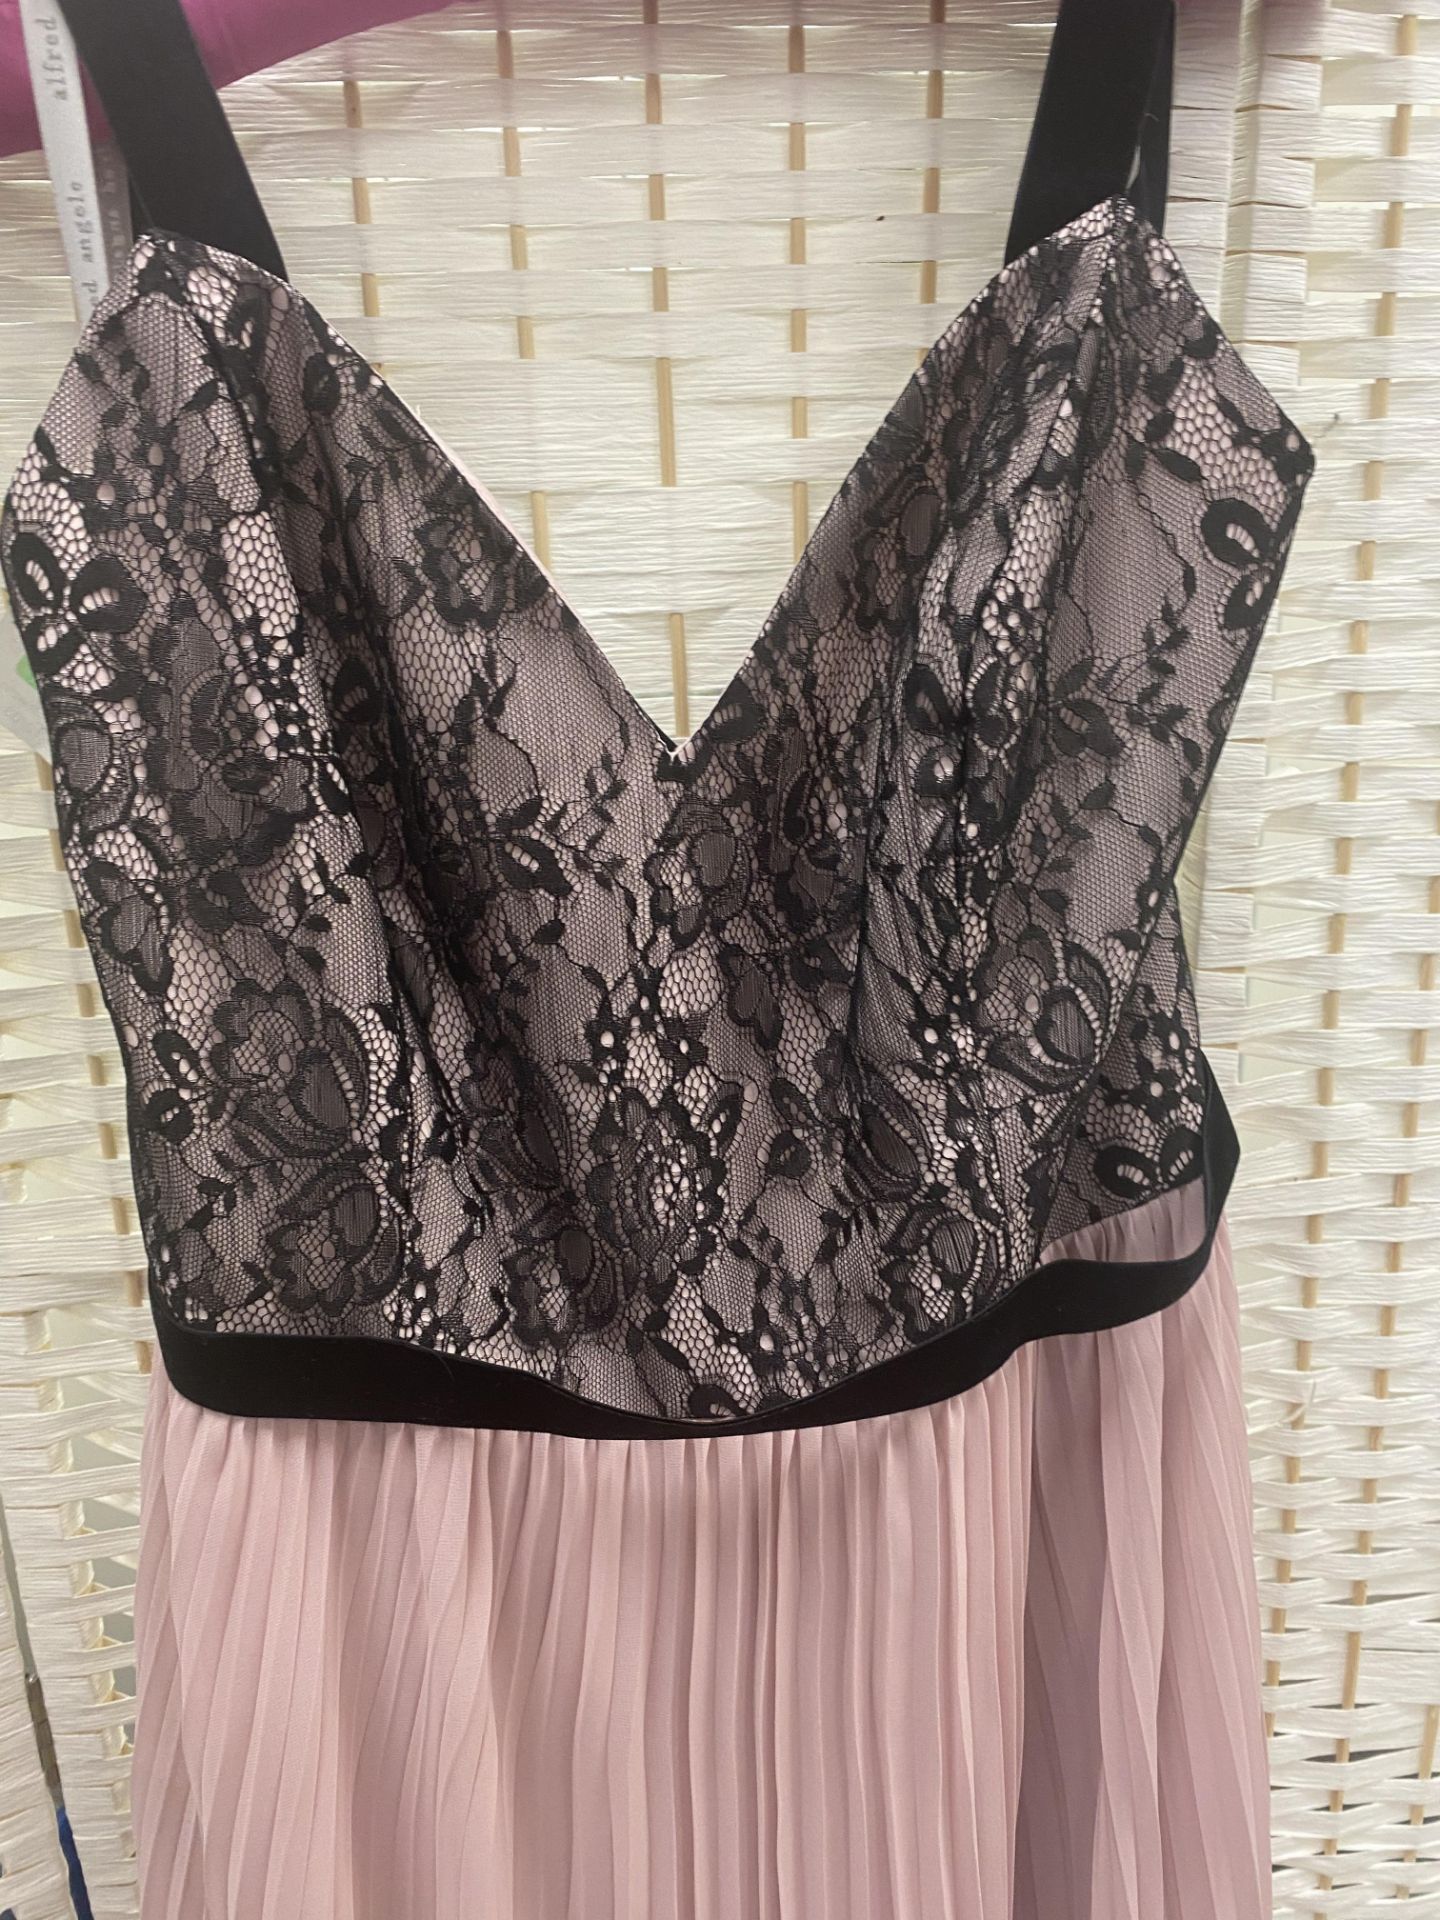 Alfred Angelo prom dress size 16 black lace bodice, blush pink skirt - Image 4 of 6